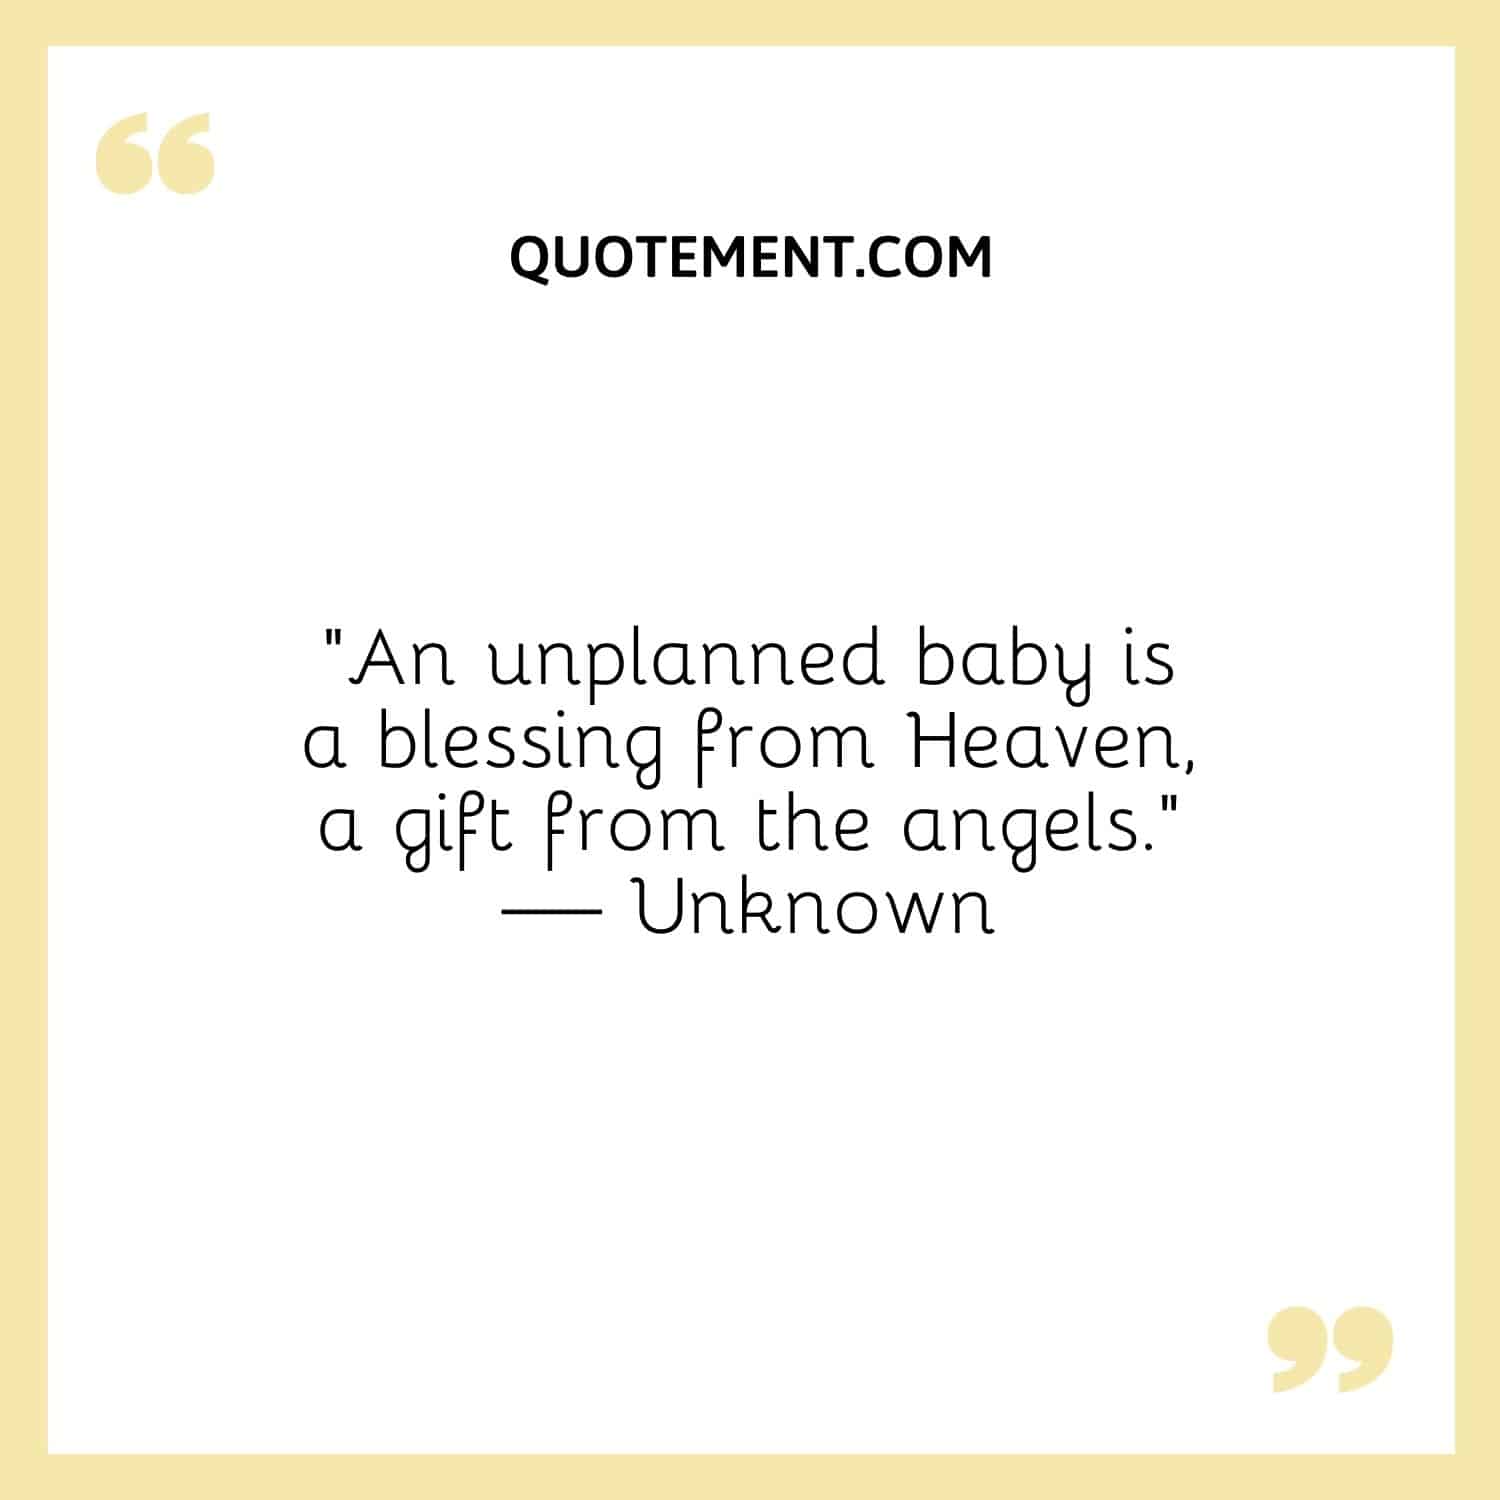 An unplanned baby is a blessing from Heaven